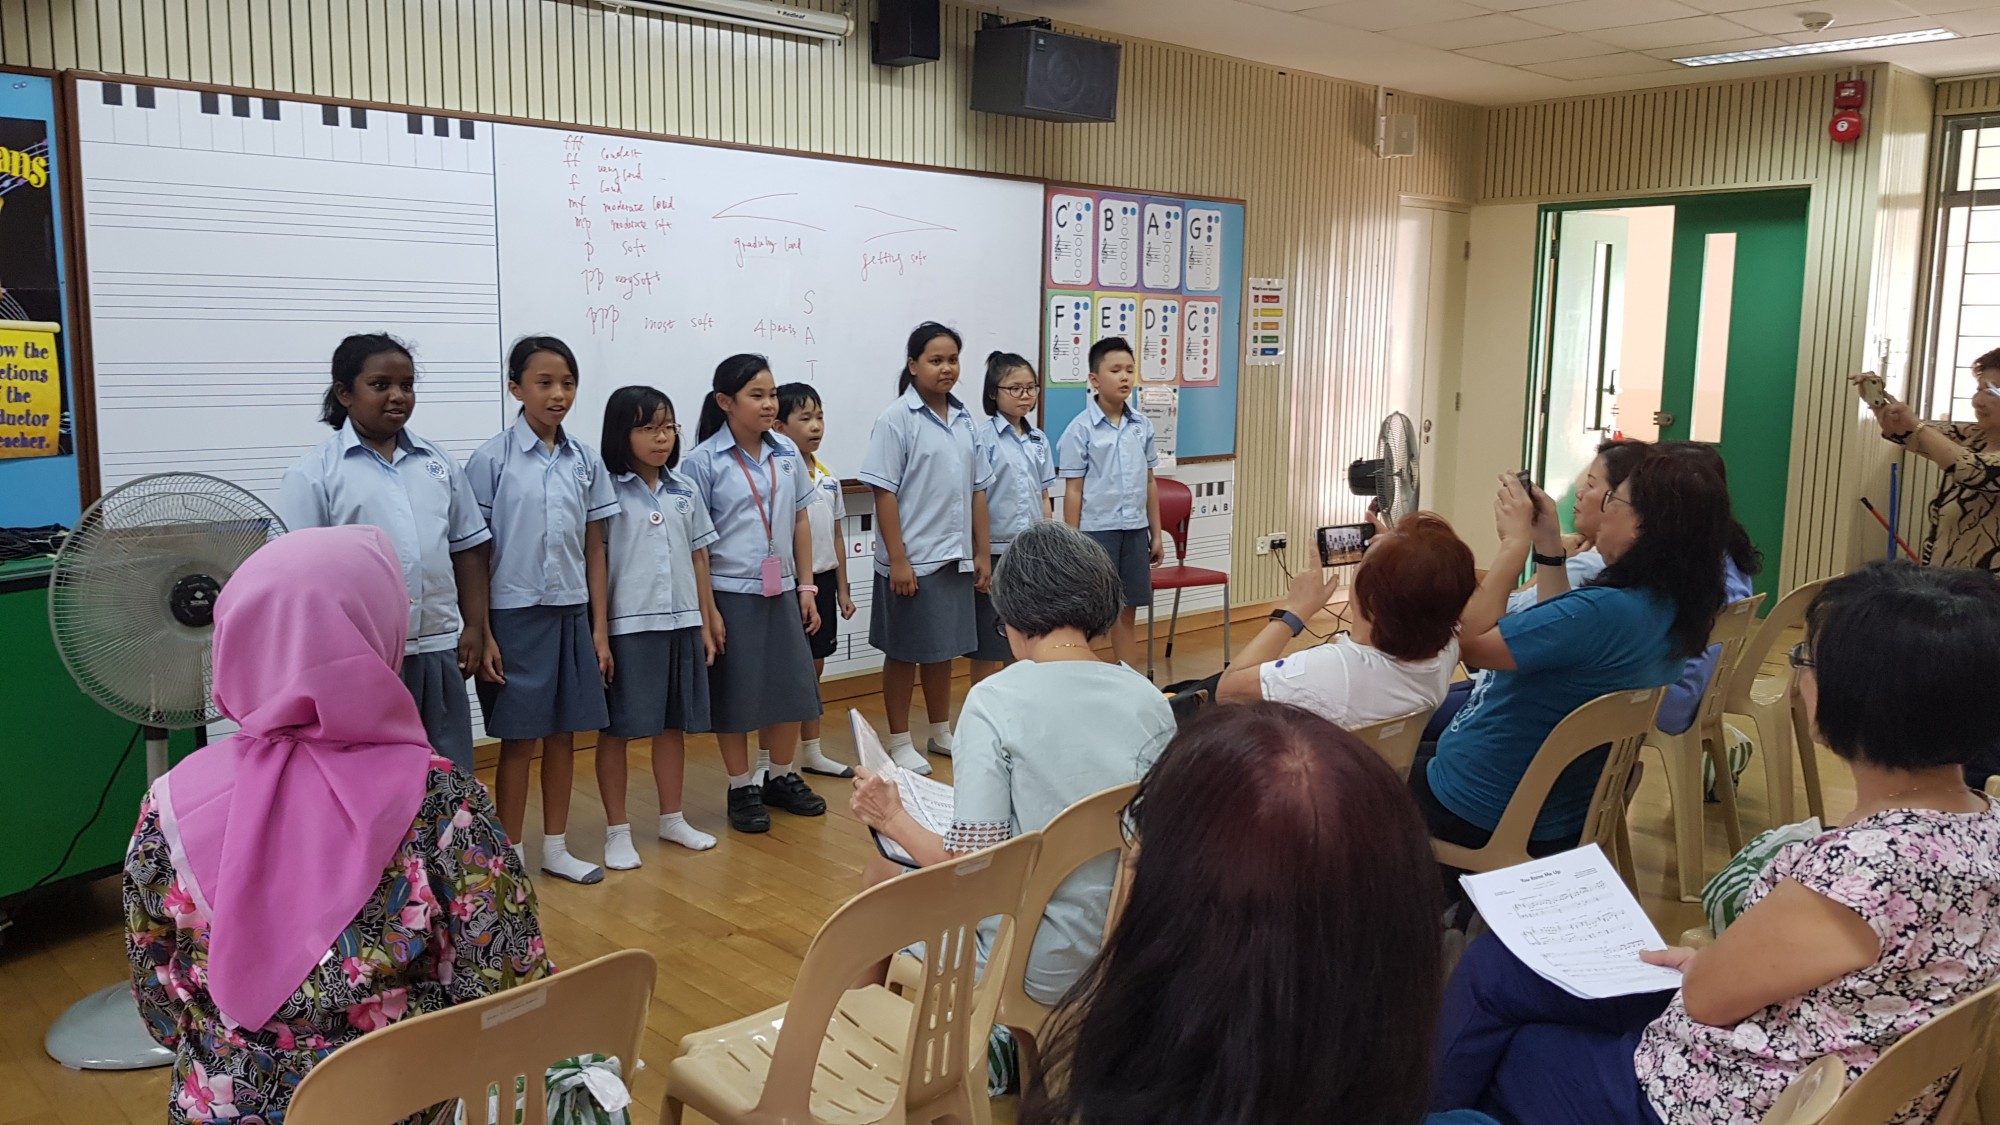 Primary 4 students had a Values-in-Action session with seniors from an external organization